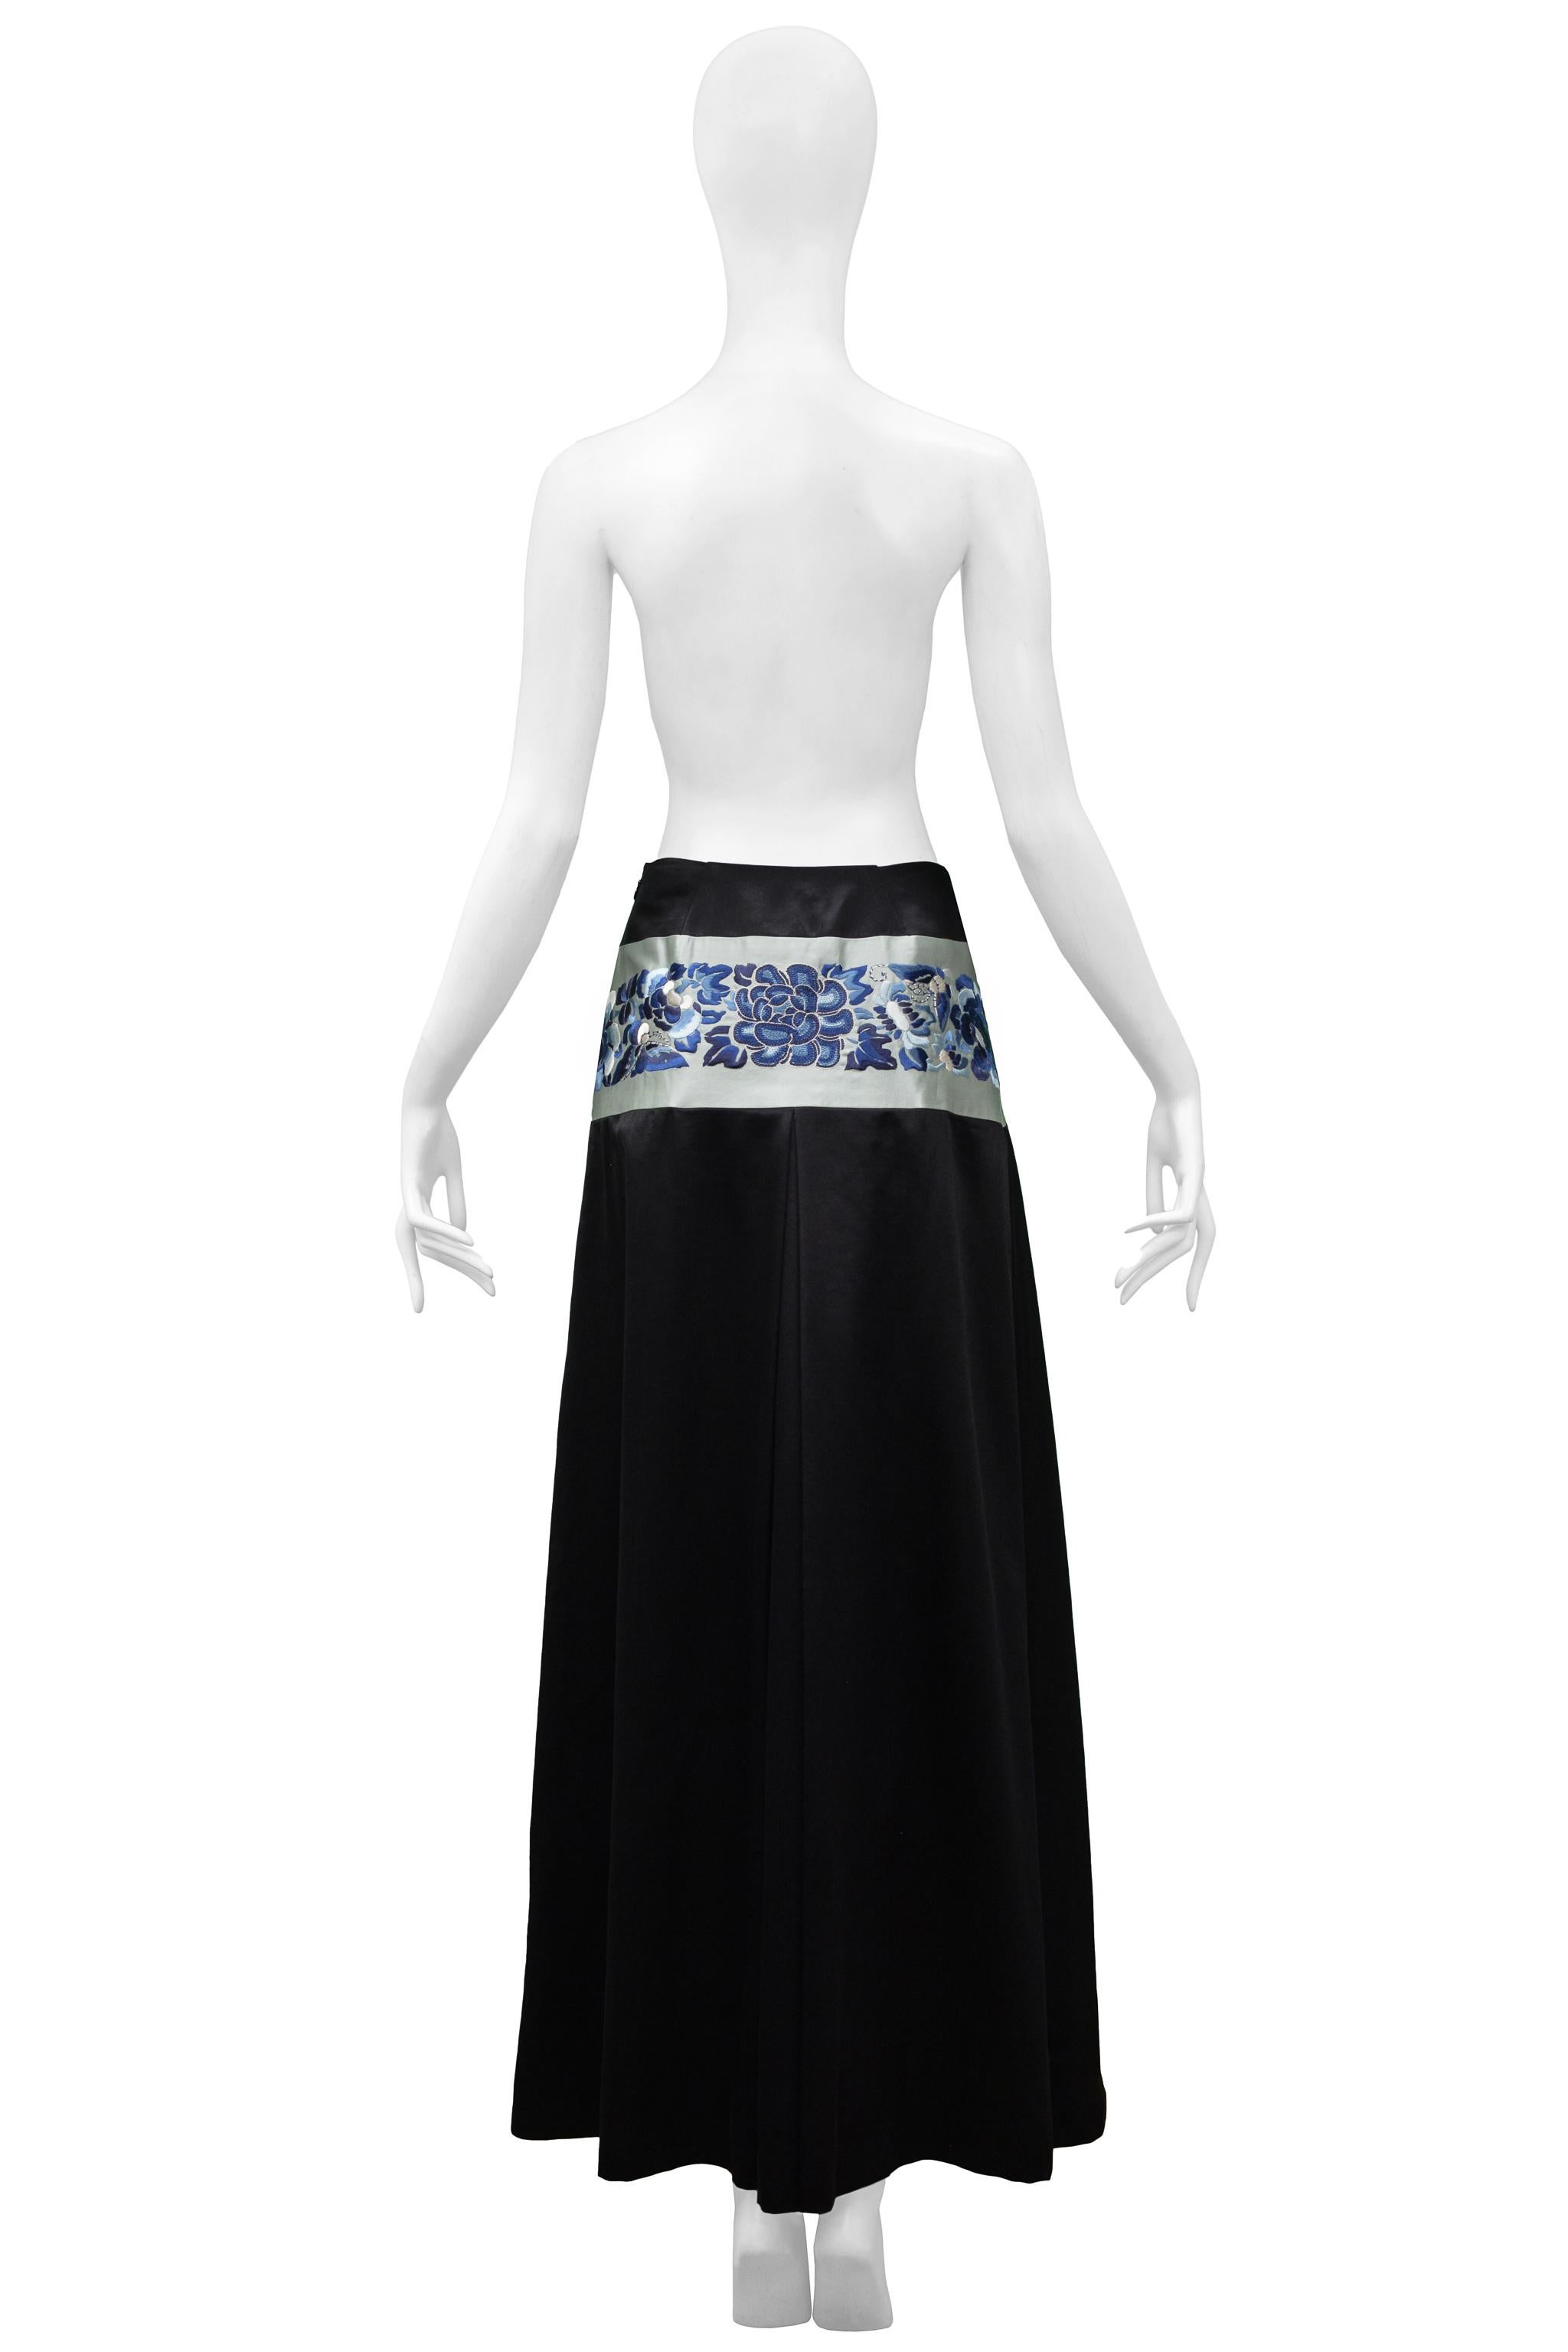 Women's John Galliano Black Satin Maxi Skirt With Blue Floral Asian Inspired Waistband For Sale